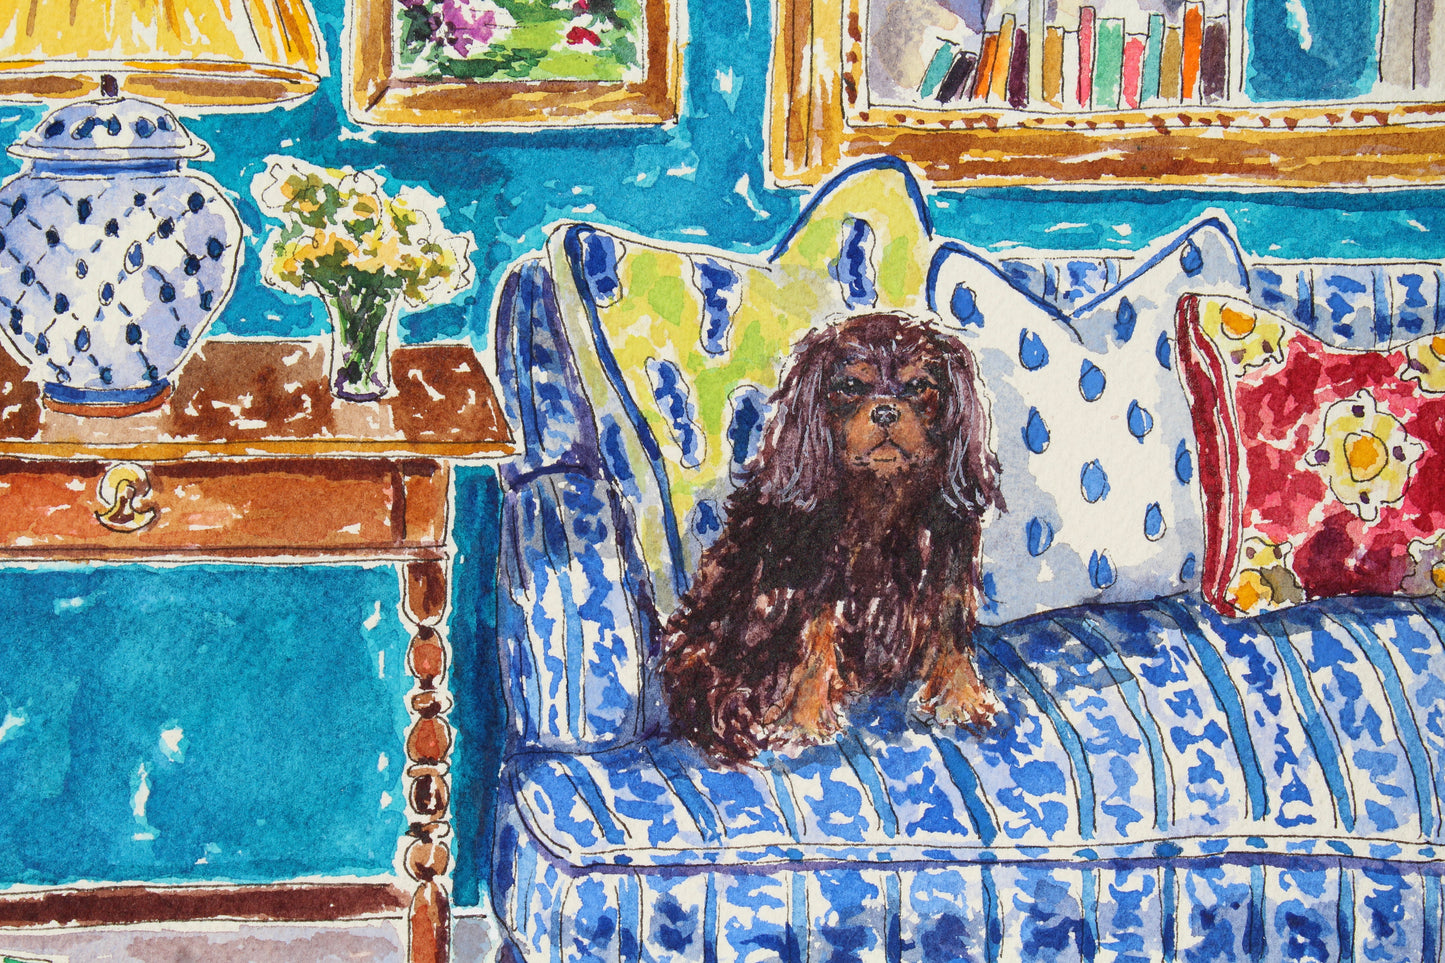 Mirror Mirror On The Wall, An Original 14" x 10" Watercolor And Ink Painting Of A Room Scene With A Teal Wall And King Charles Cavalier Spaniel